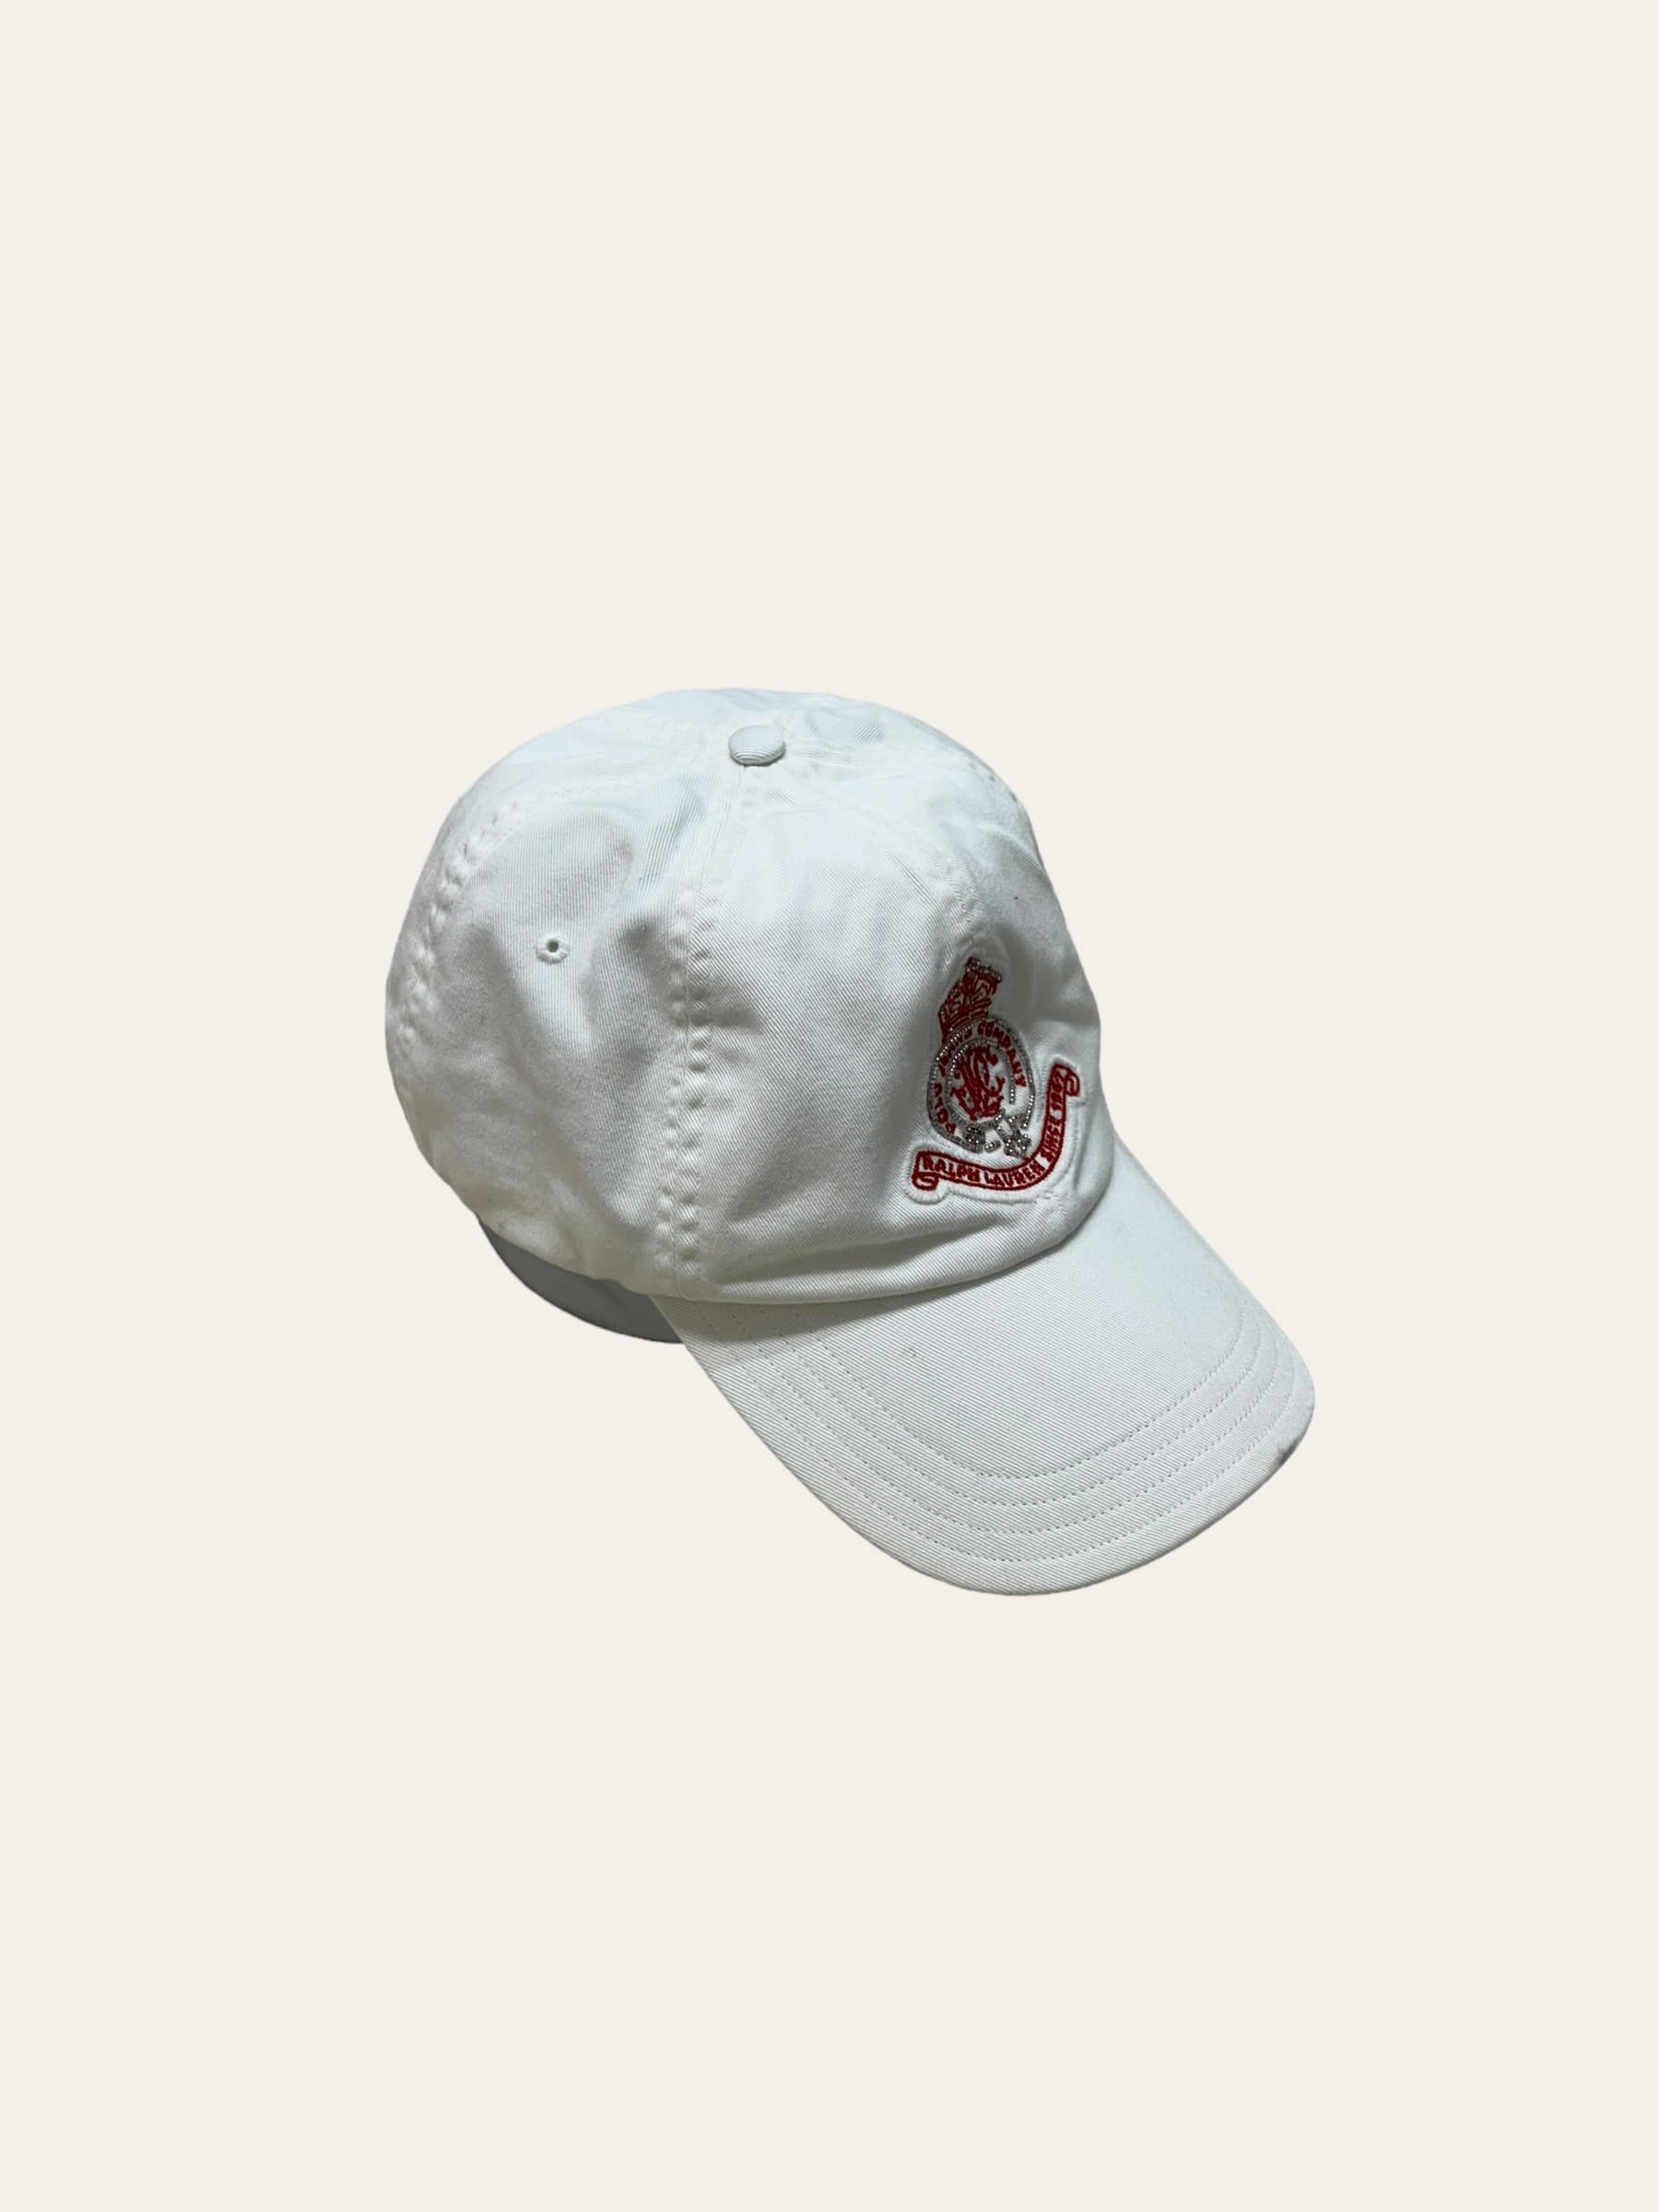 Polo jeans company white crest patched cap